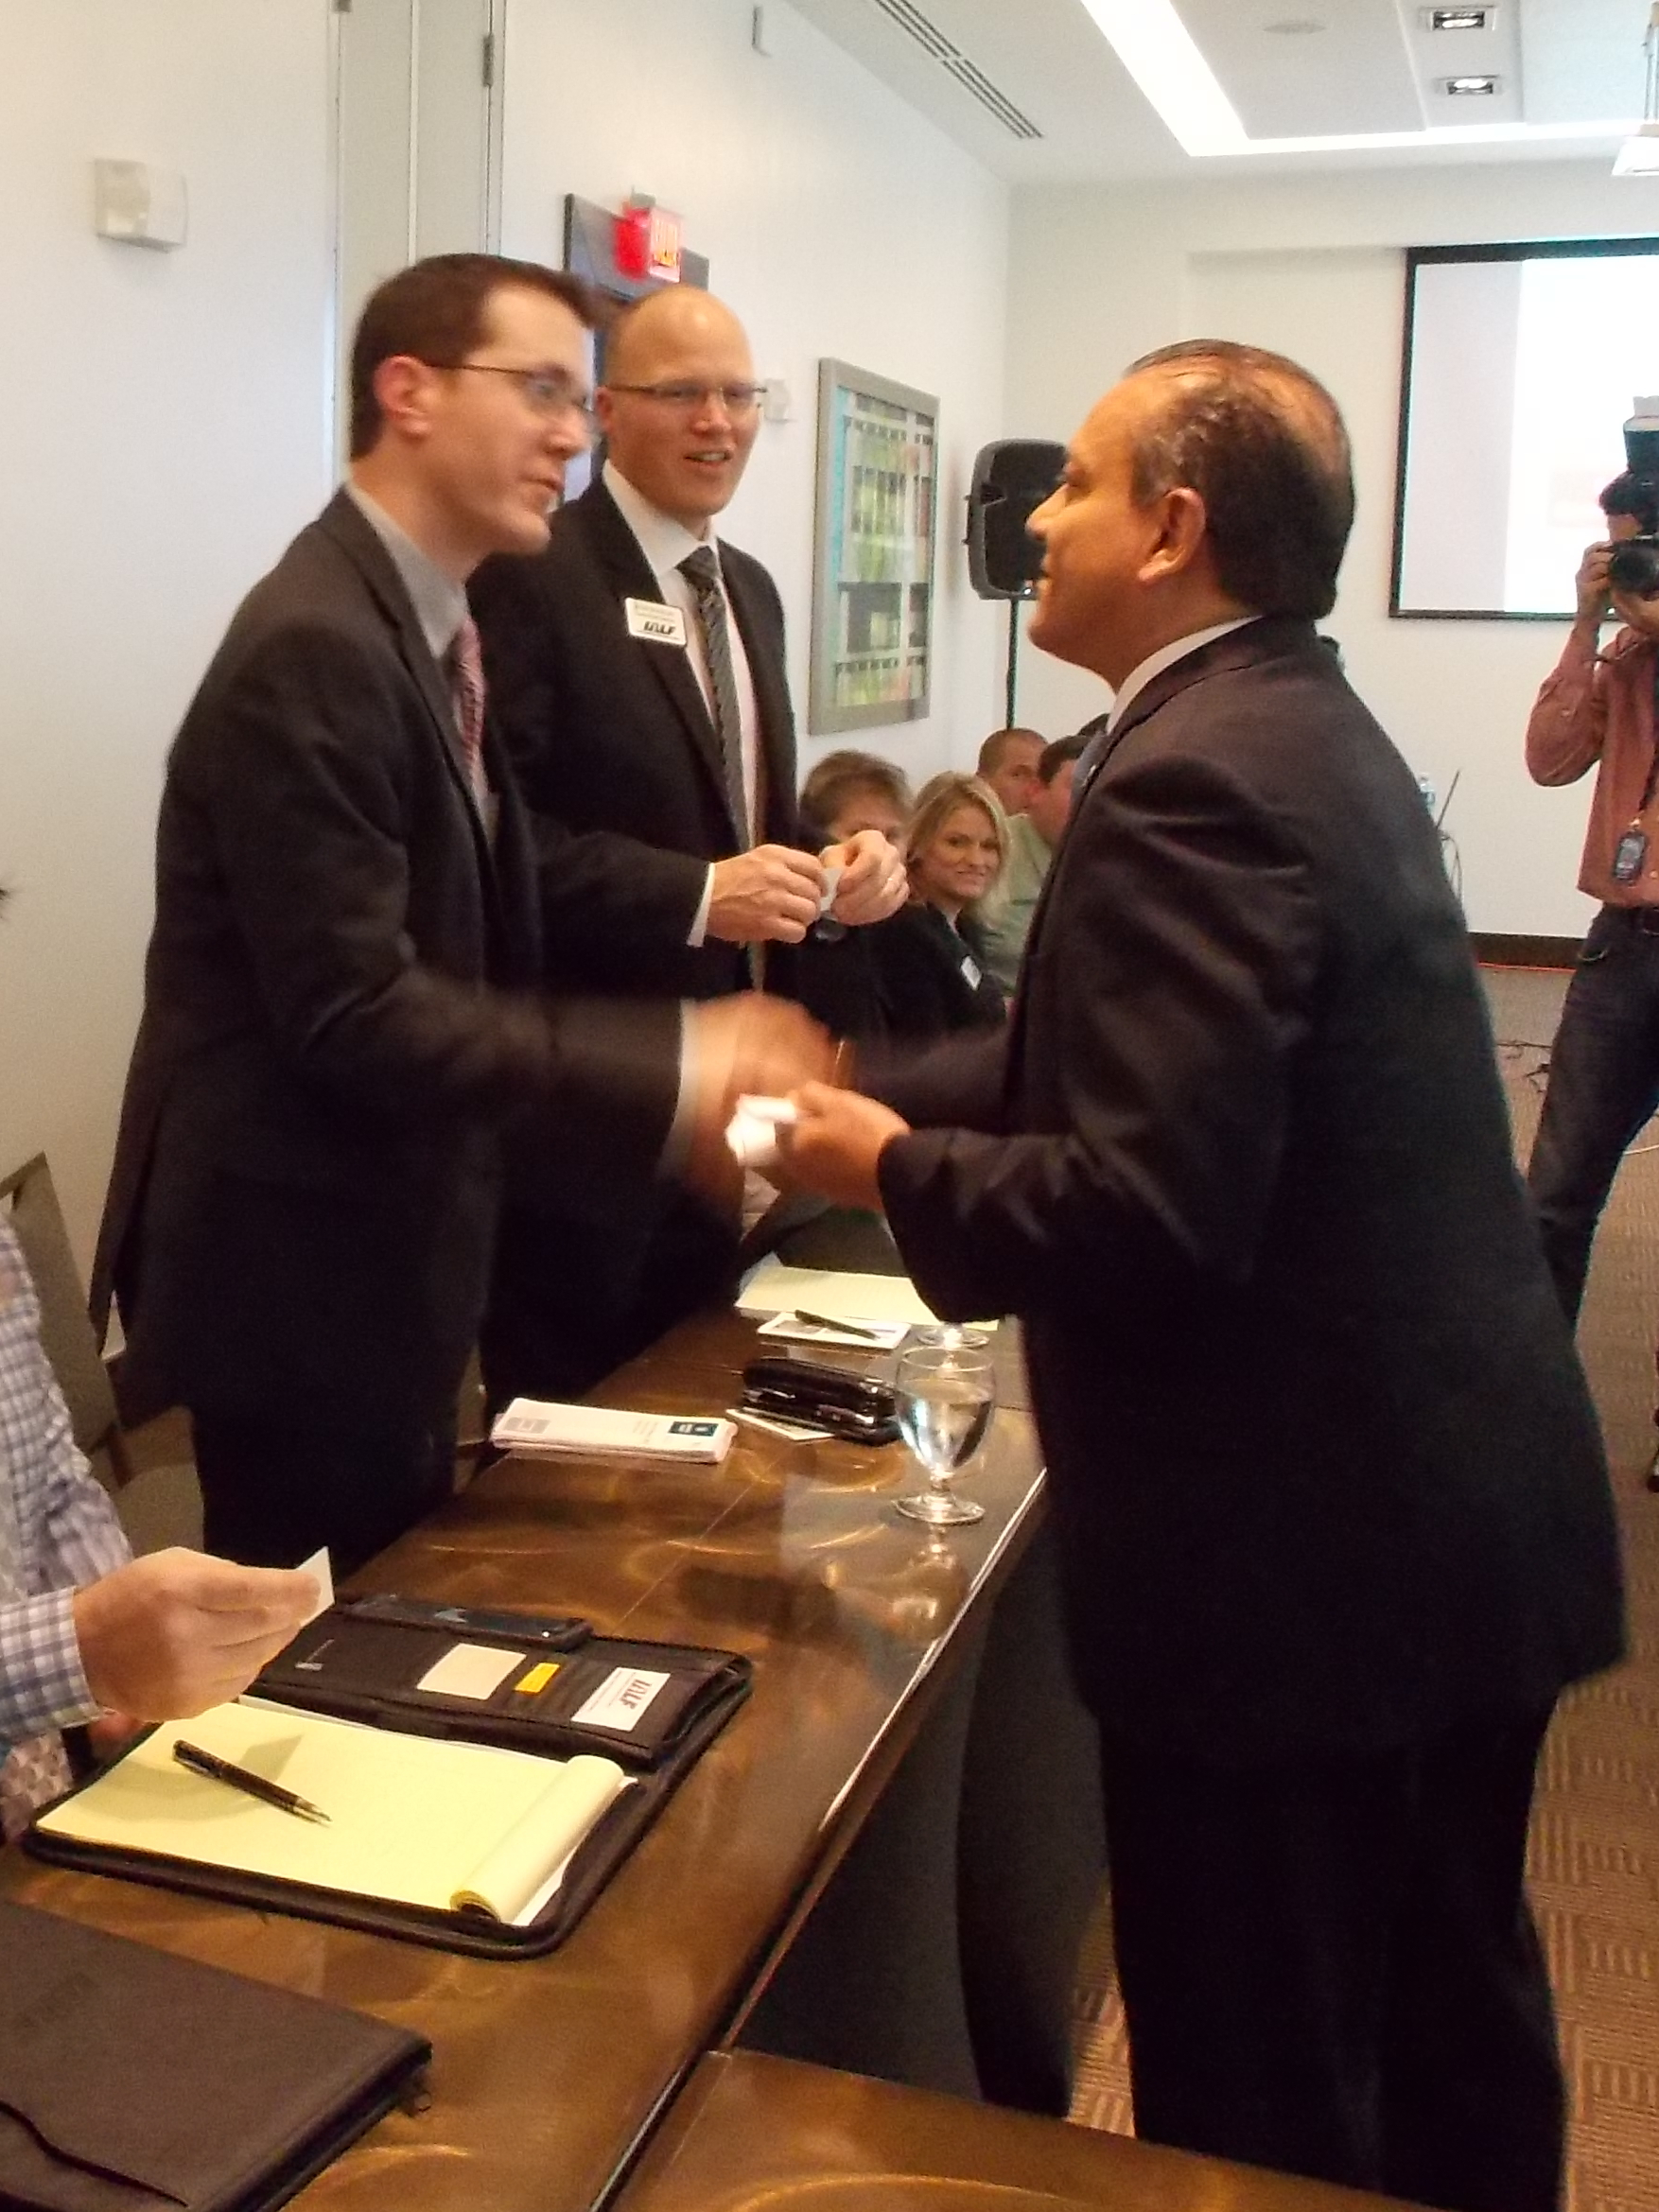 Class members Steve Bridge and Ryan Buckles greet and trade business cards with Panama Vice Minister of Interior Commerce & Industry, Manuel Grimaldo.